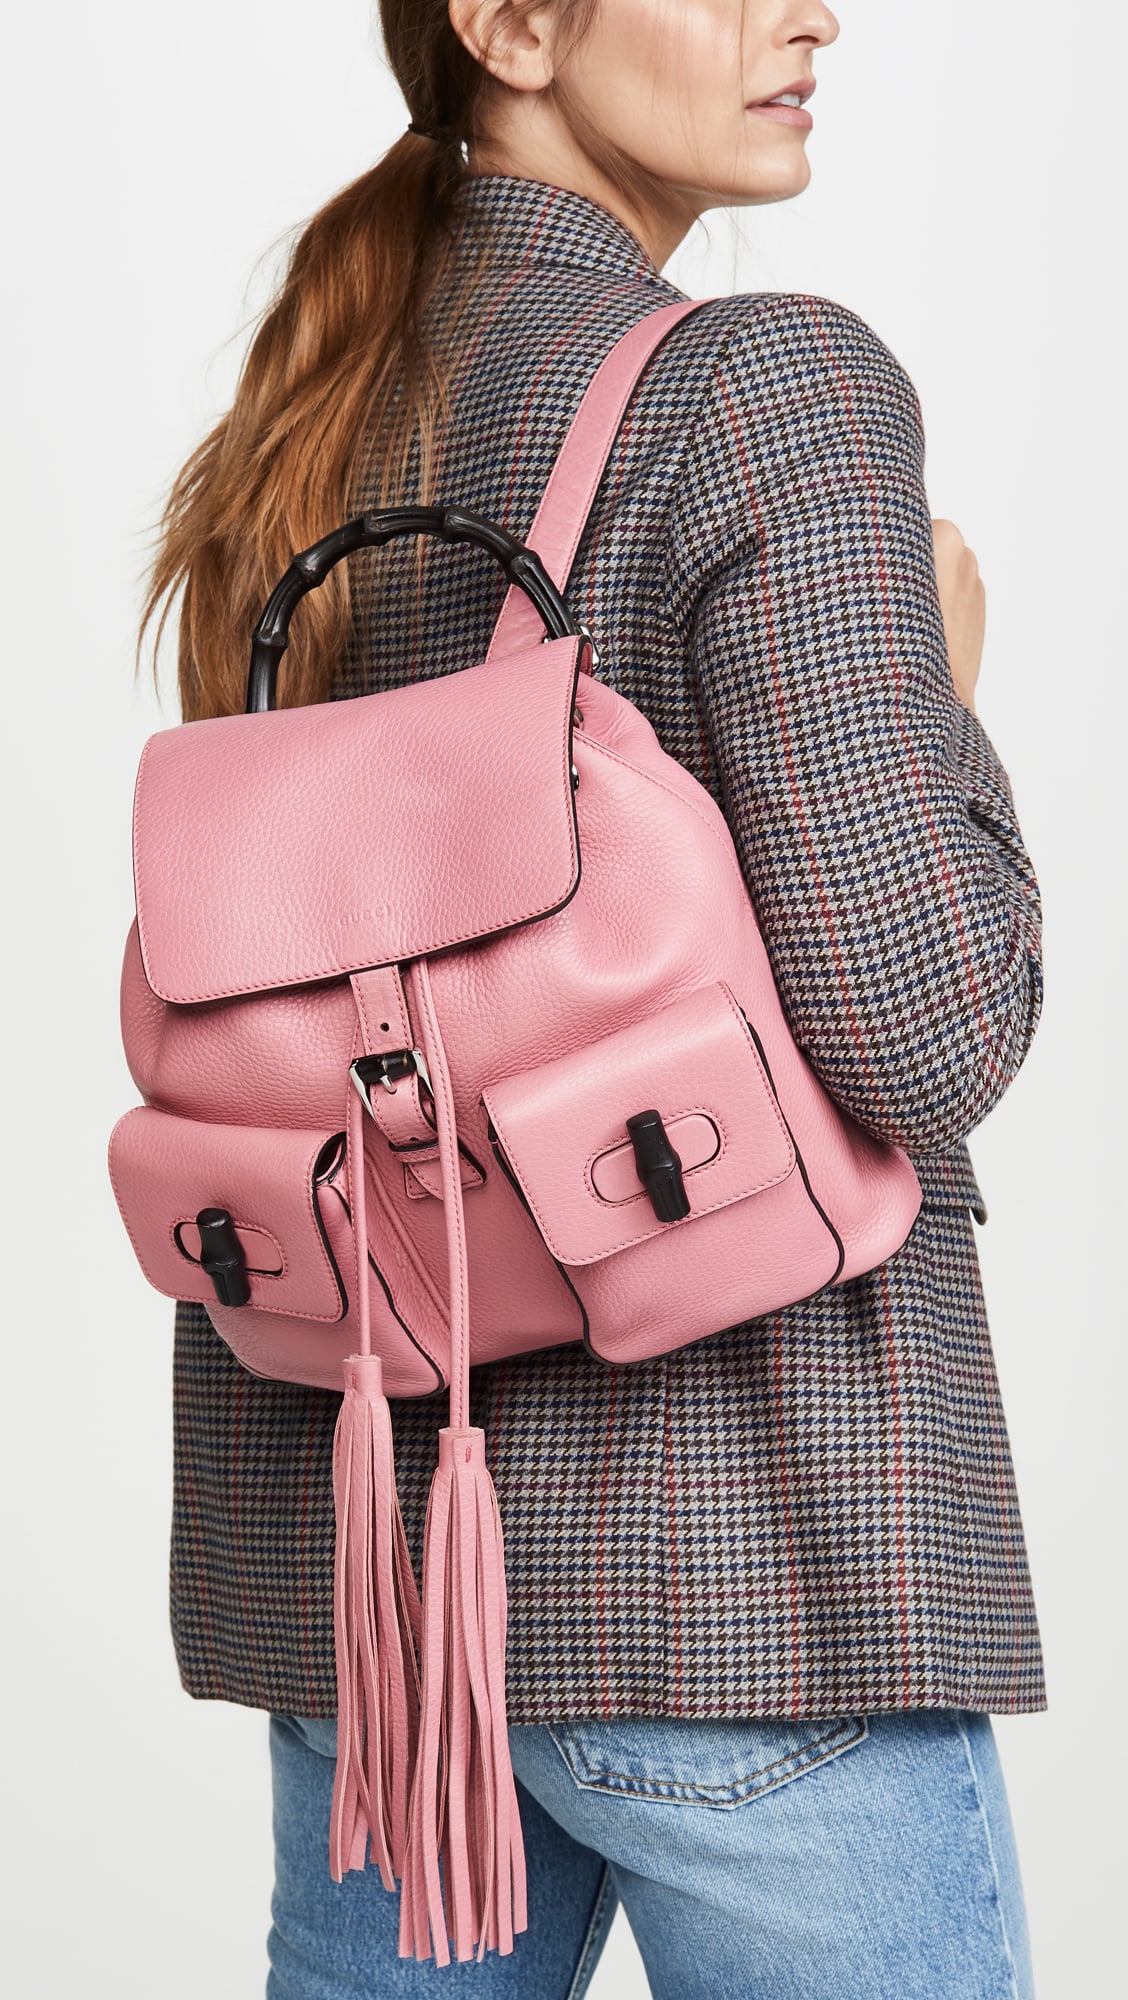 Gucci Pink Leather Bamboo Handle Backpack | Live Your Best Gucci Life in  These Vintage and Secondhand Bags, Shoes, Tees, and More | POPSUGAR Fashion  Photo 14